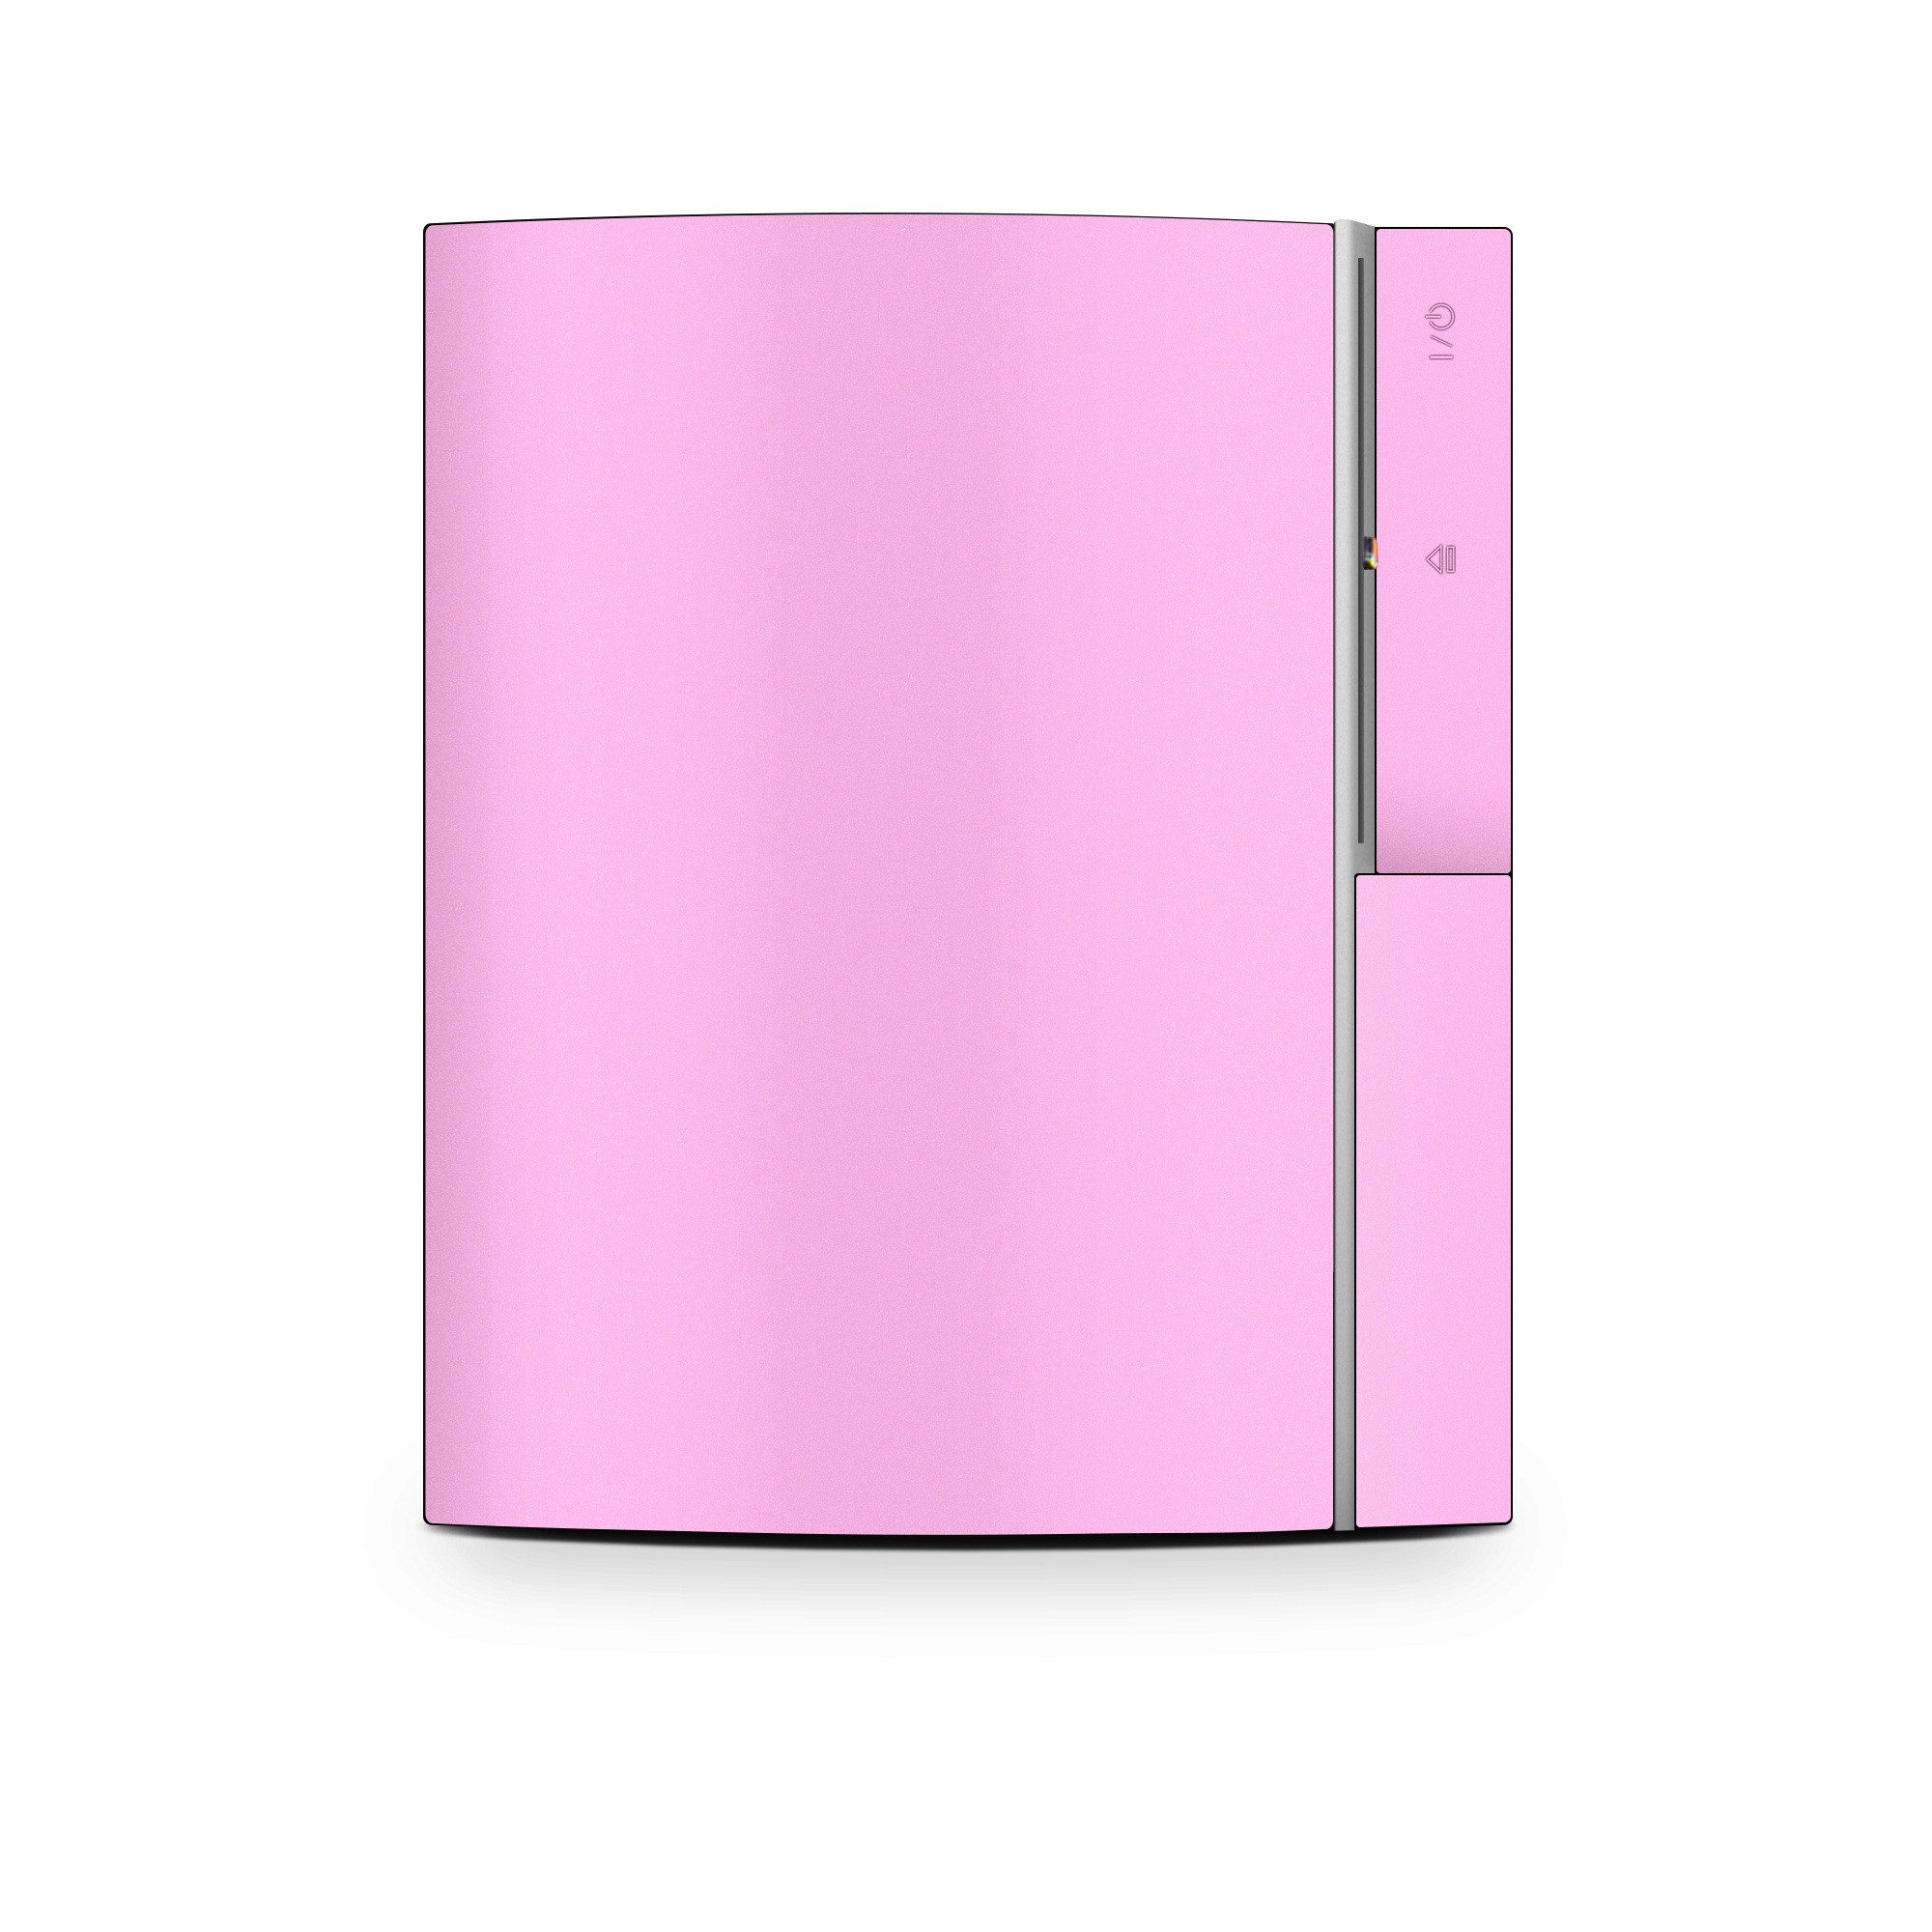 PS3 Skin - Solid State Pink (Image 1)